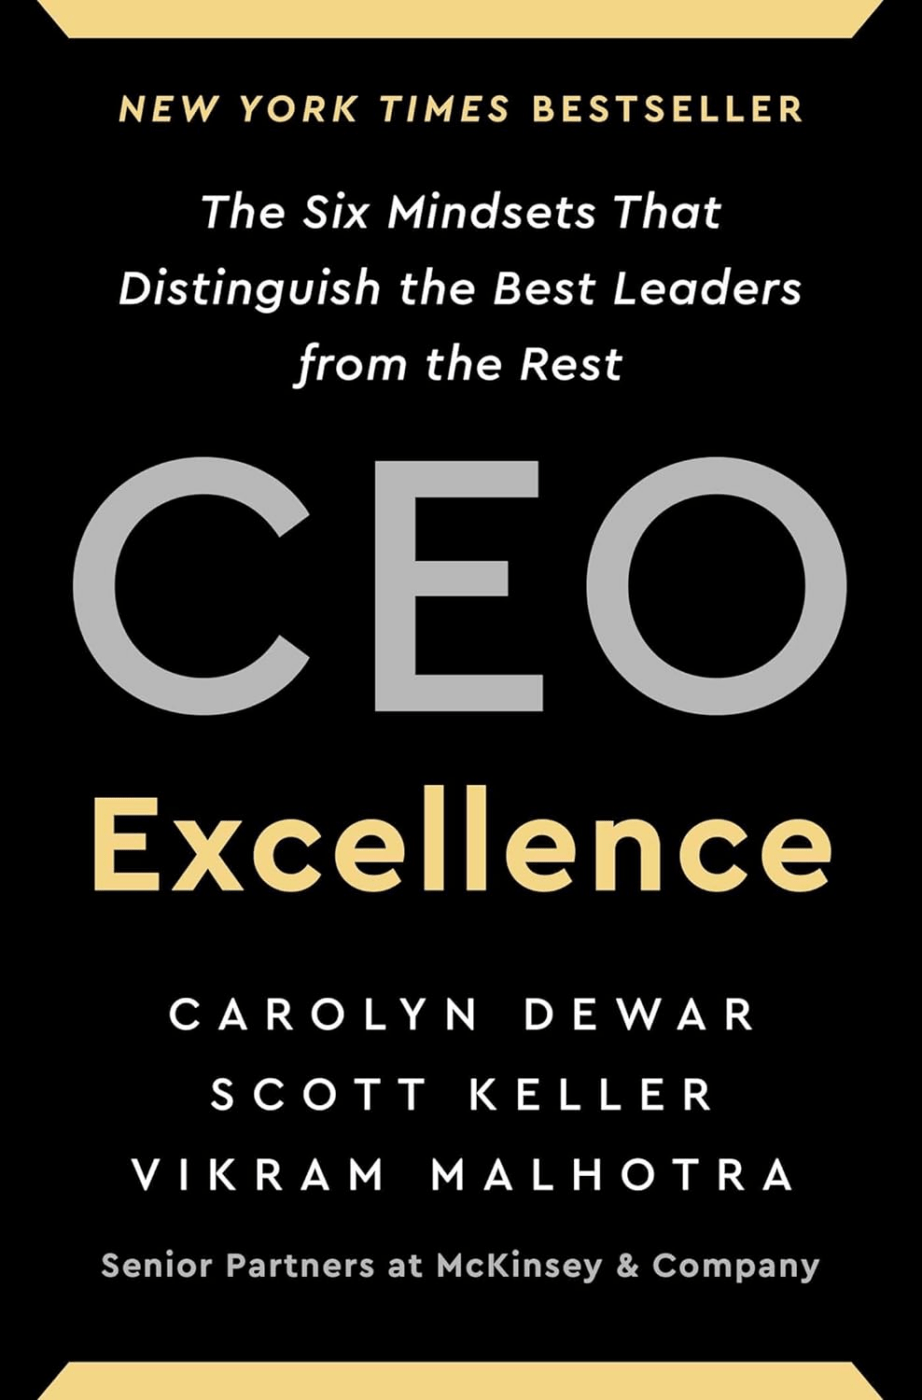 CEO-Excellence